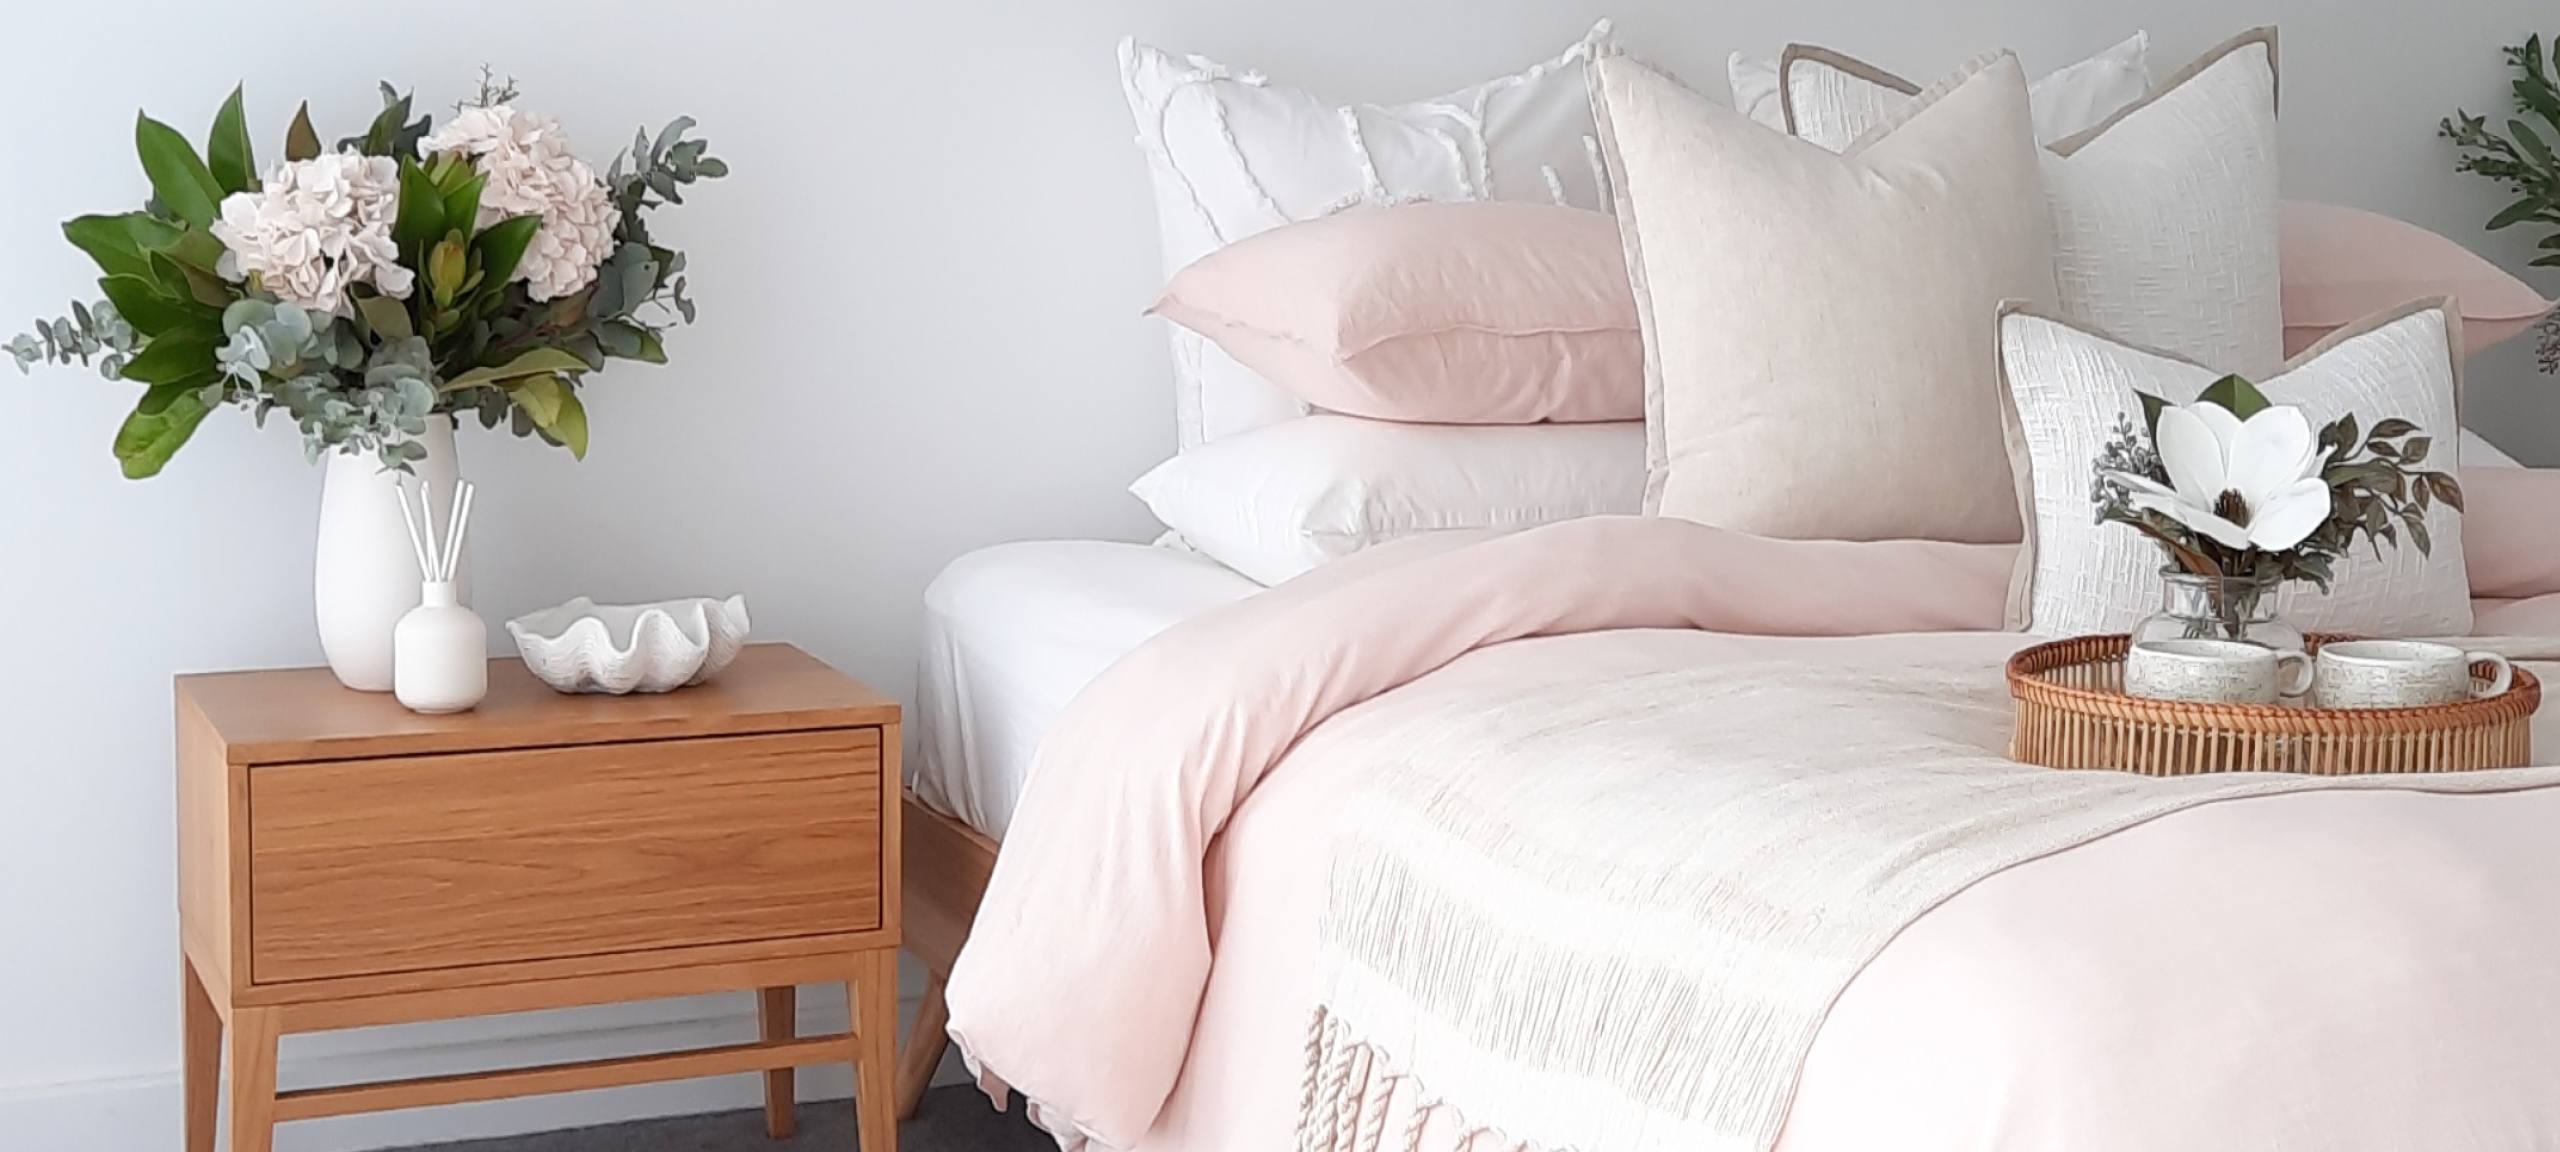 At home with Pillow Talk bedroom styling